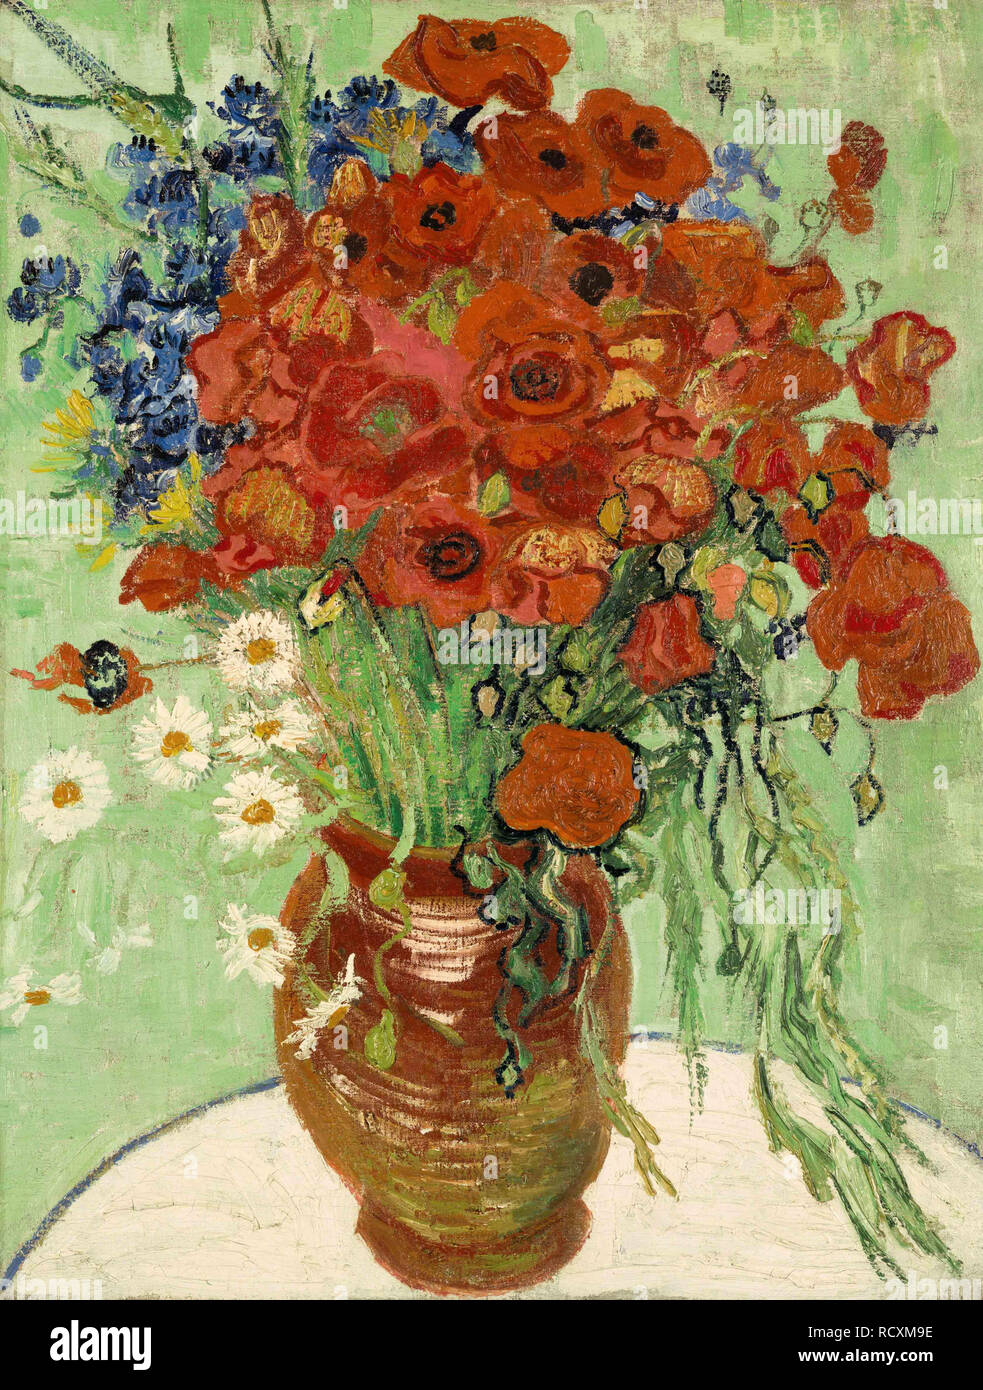 Still Life, Vase with Daisies and Poppies. Museum: PRIVATE COLLECTION. Author: VAN GOGH, VINCENT. Stock Photo